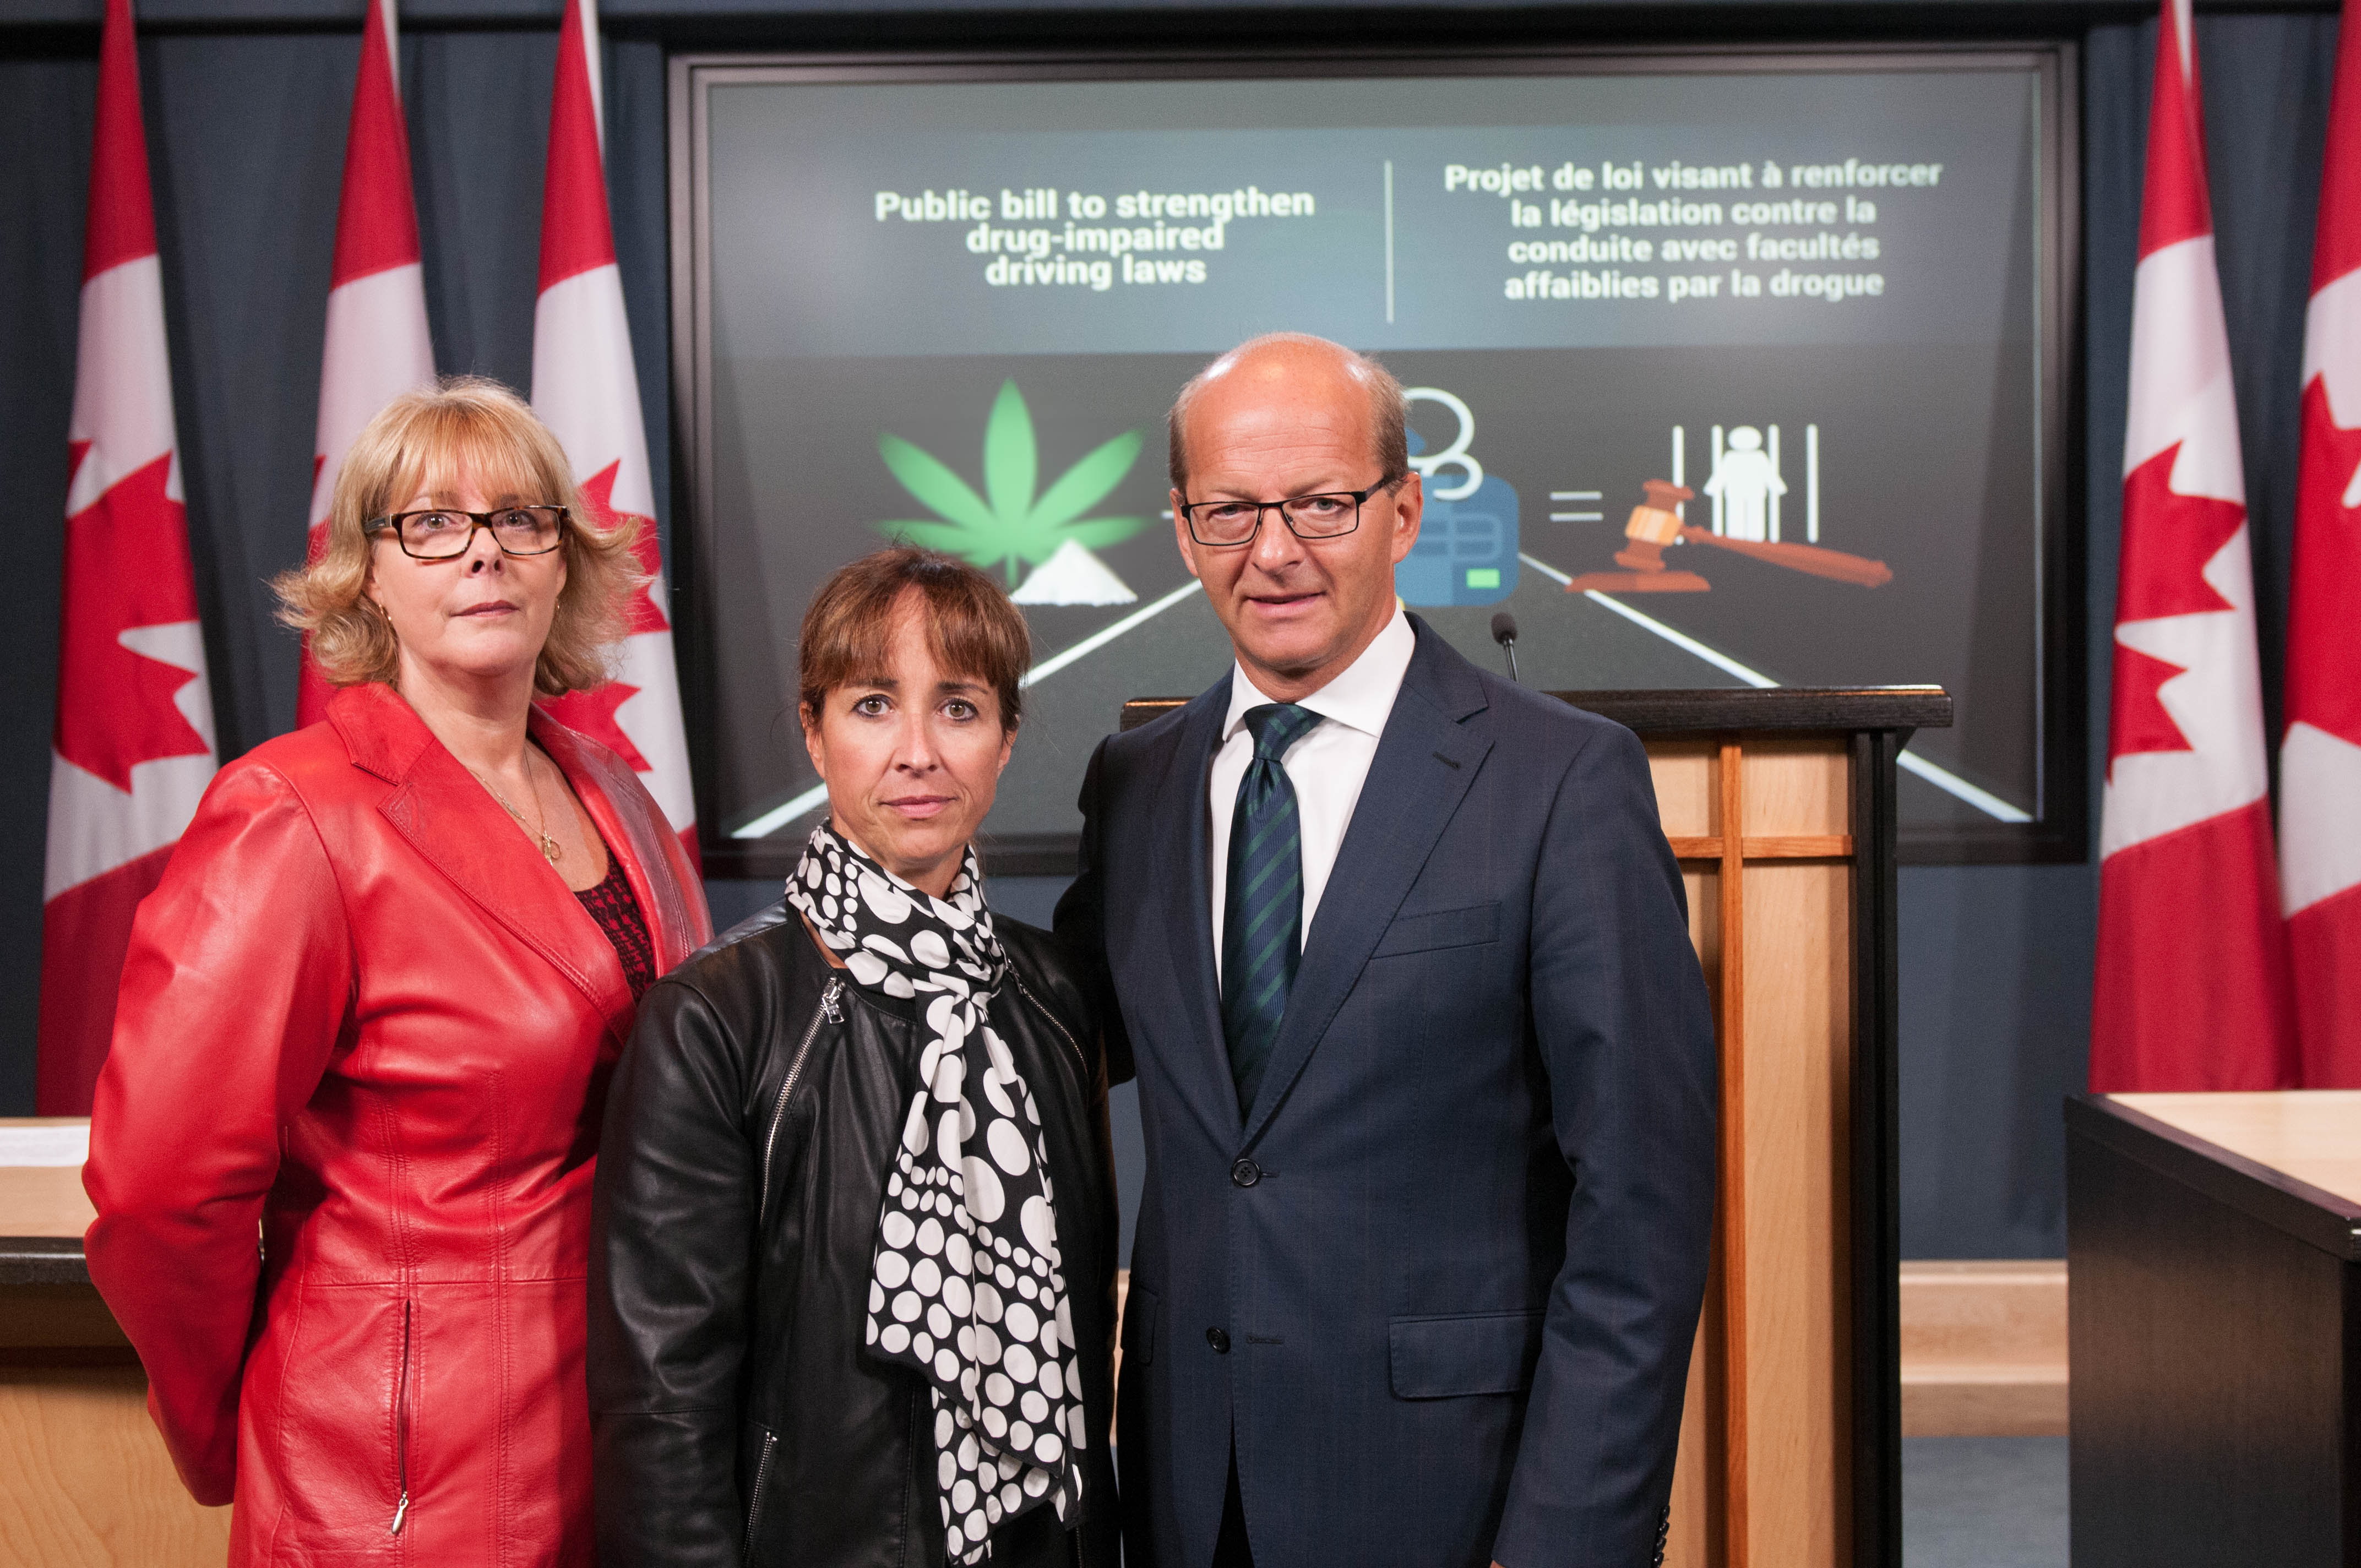 Pictured (left to right): Lise Lebel (President of the Fondation Katherine Beaulieu), Nancy Roy (Director General of the Murdered or Missing Persons’ Families’ Association) and Senator Carignan